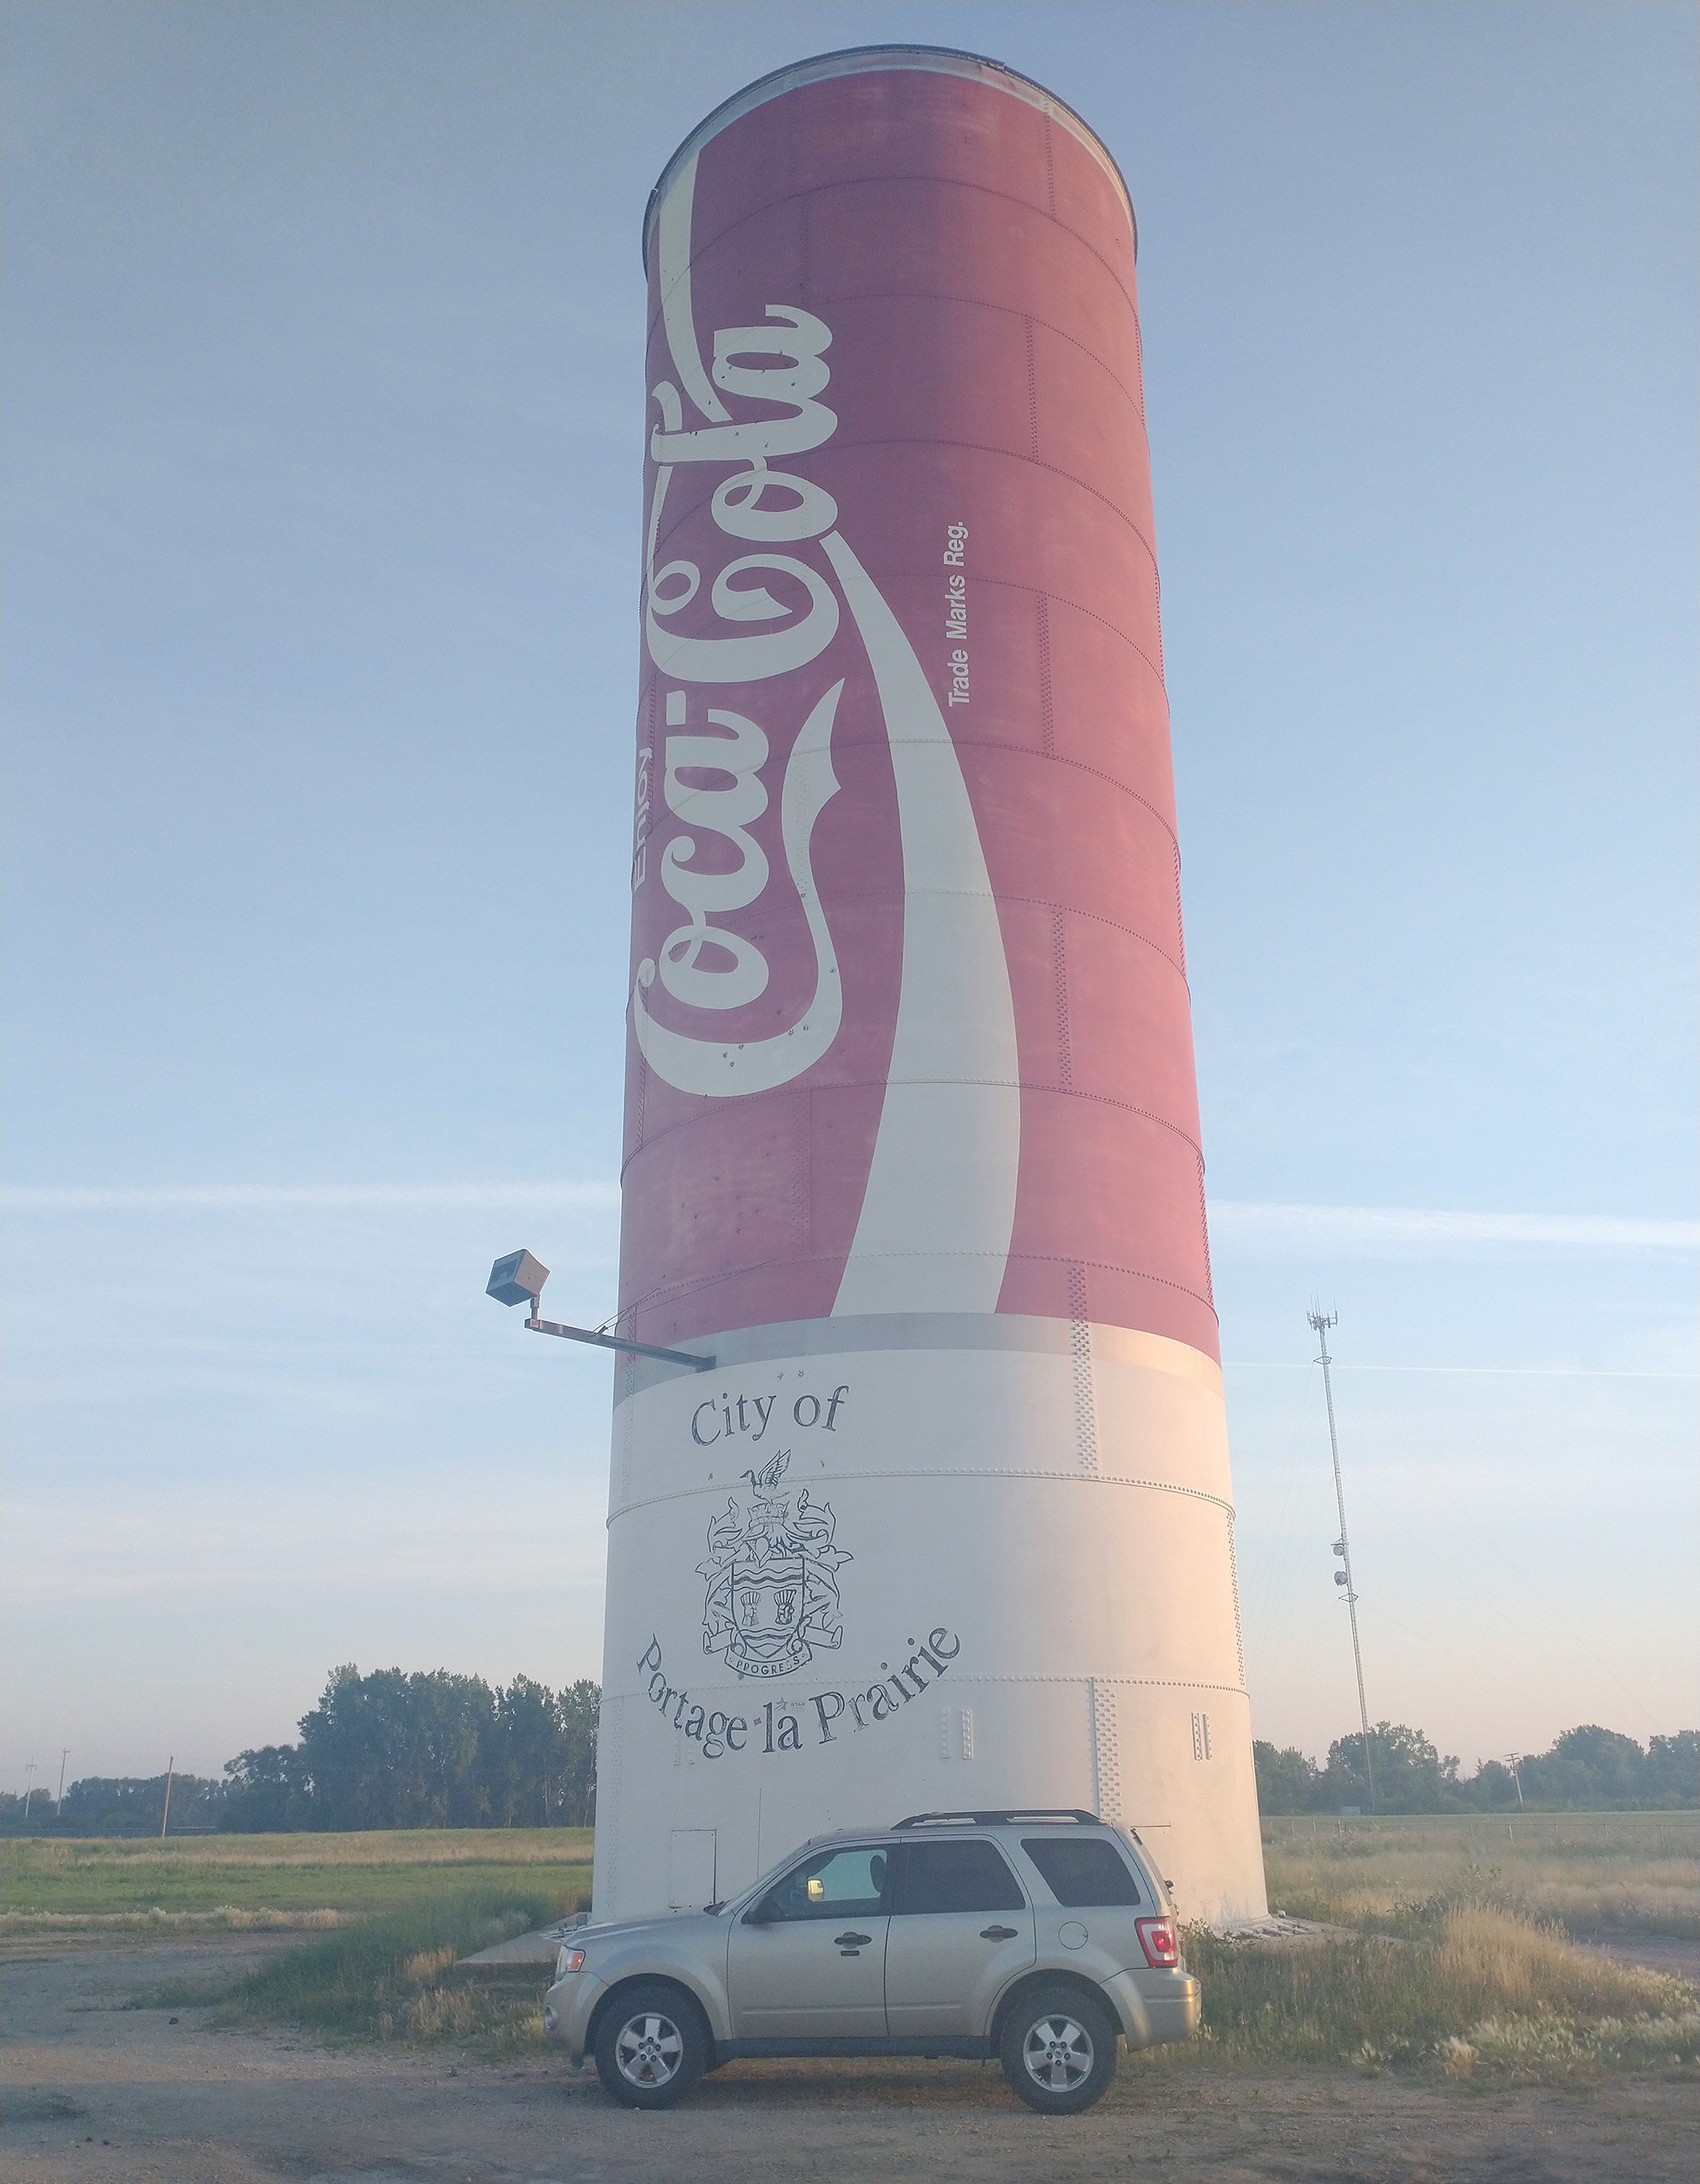 Final stop and where I spent the night: Portage la Prairie, home of the largest Coca-Cola can! It's huge